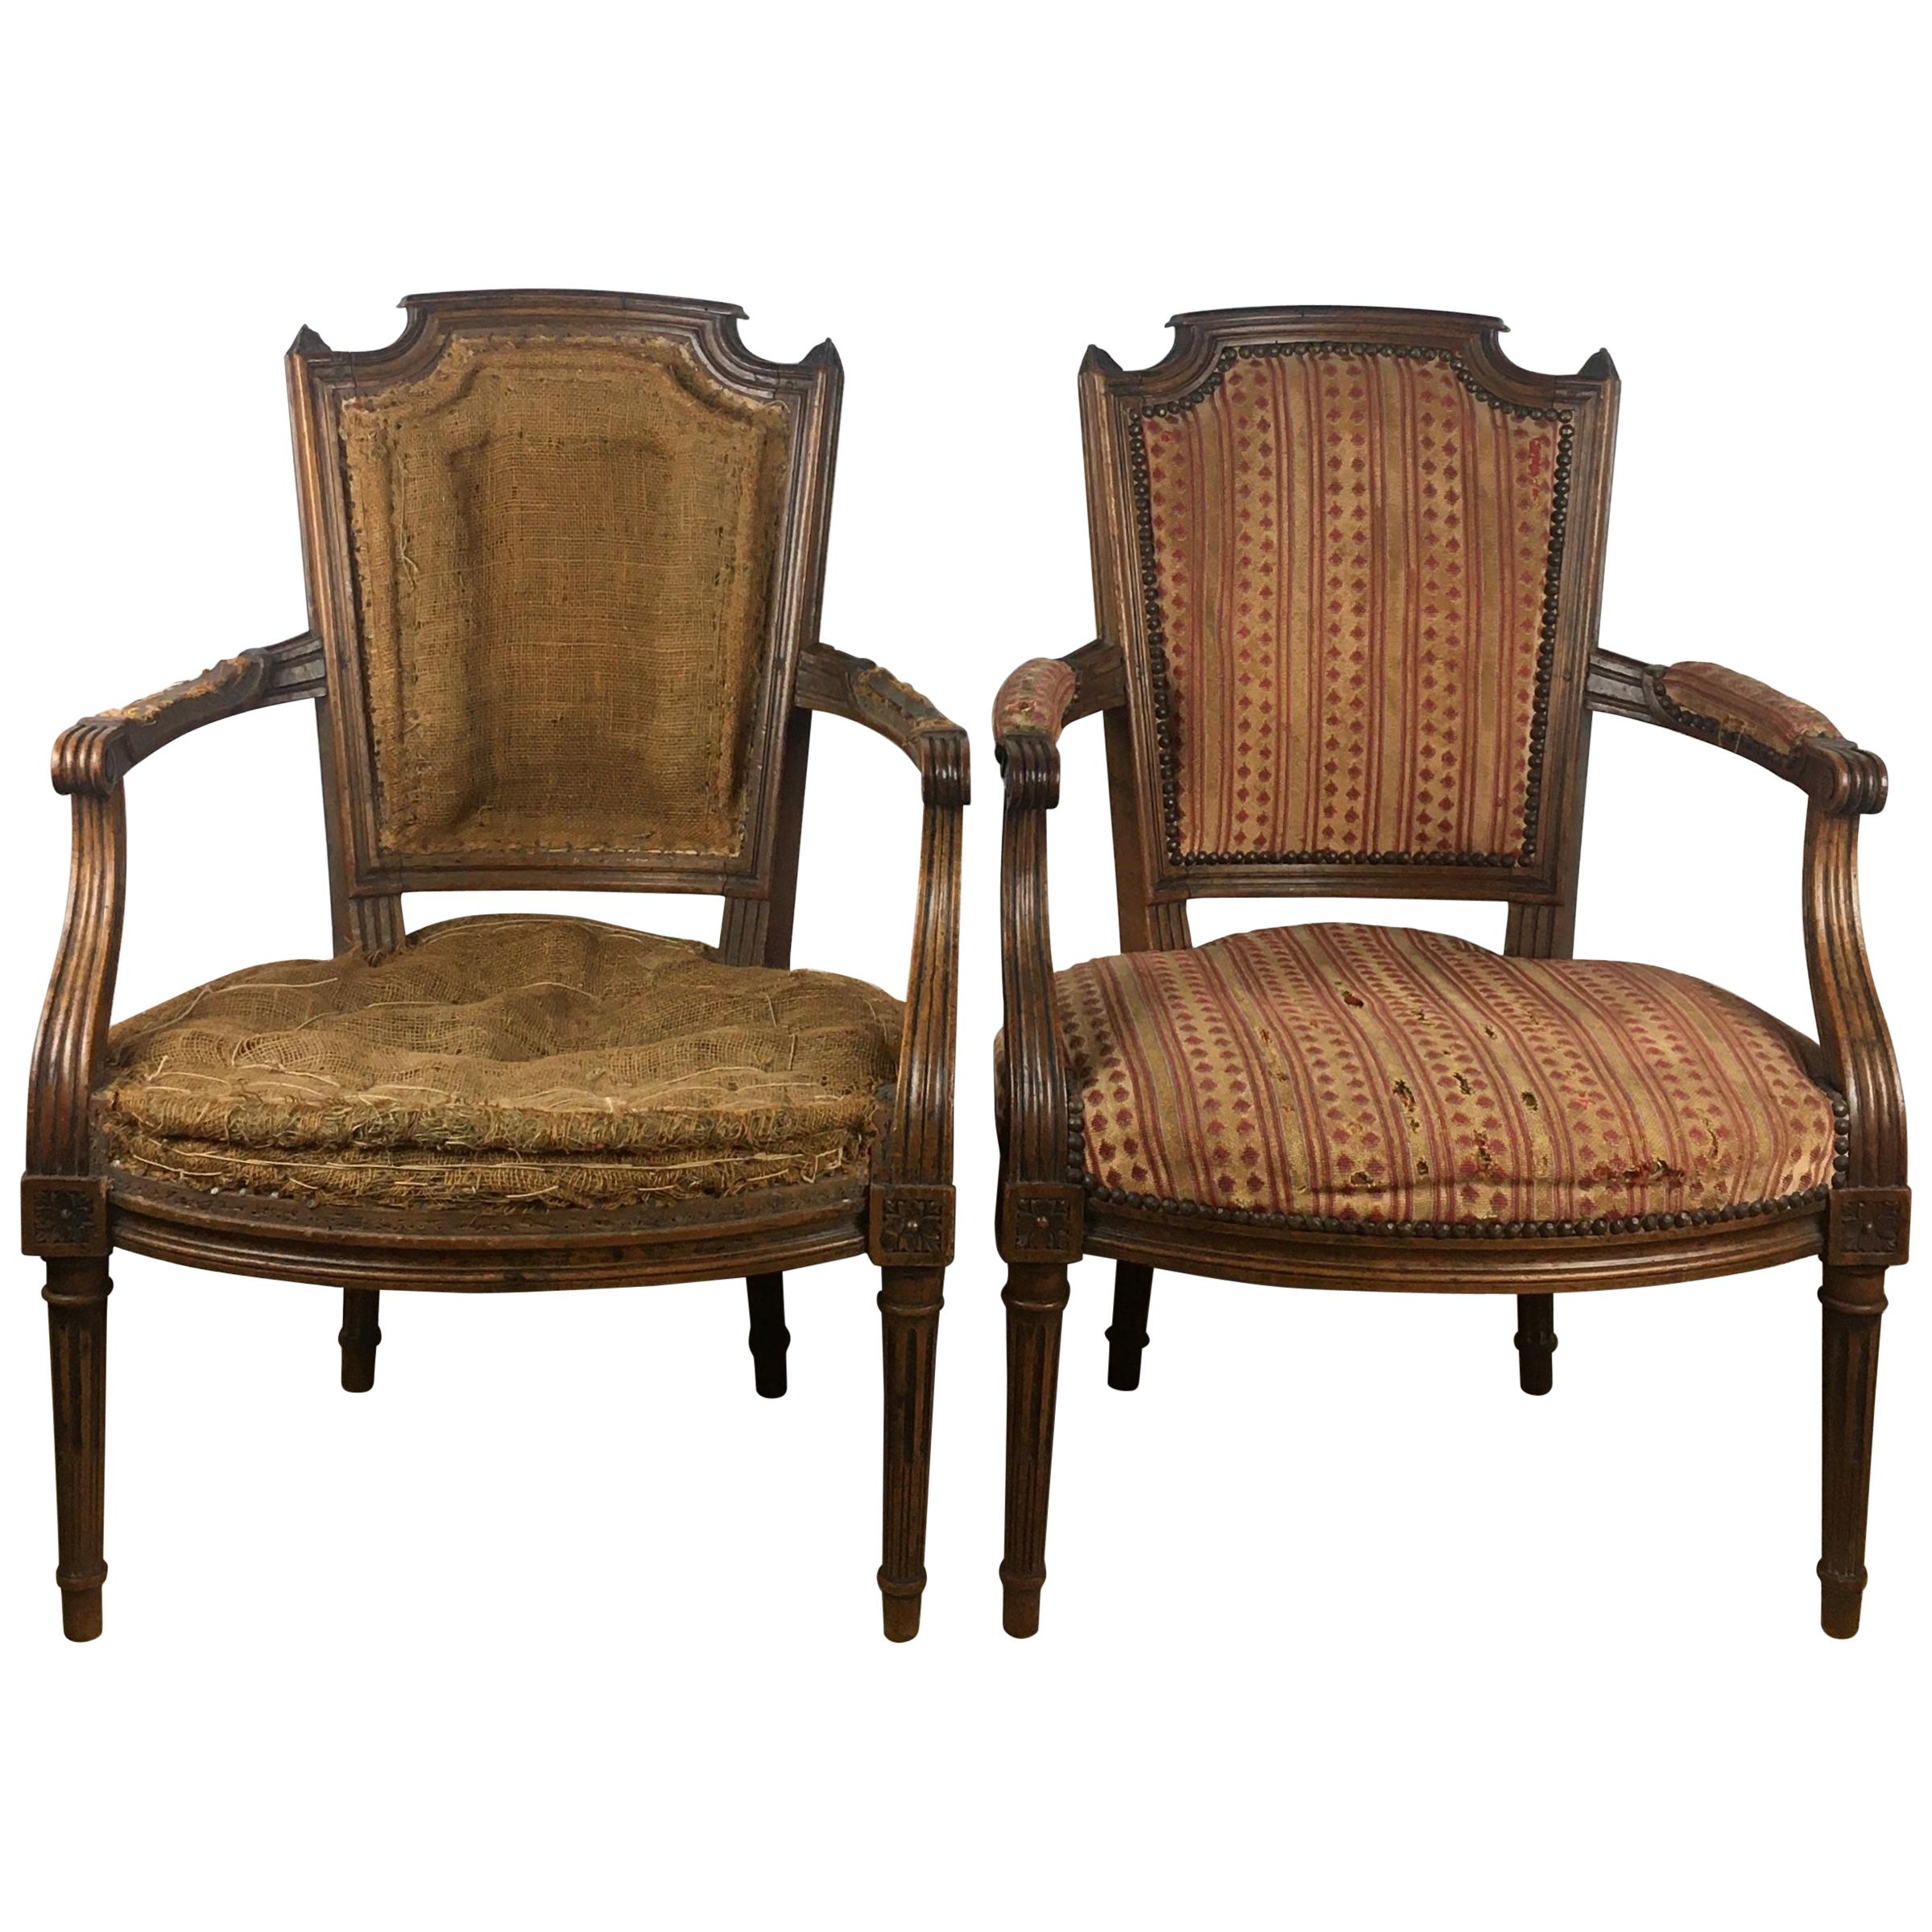 Important Pair of Louis XVI 18th Century Armchair or Fauteuils, Stamped/Signed 